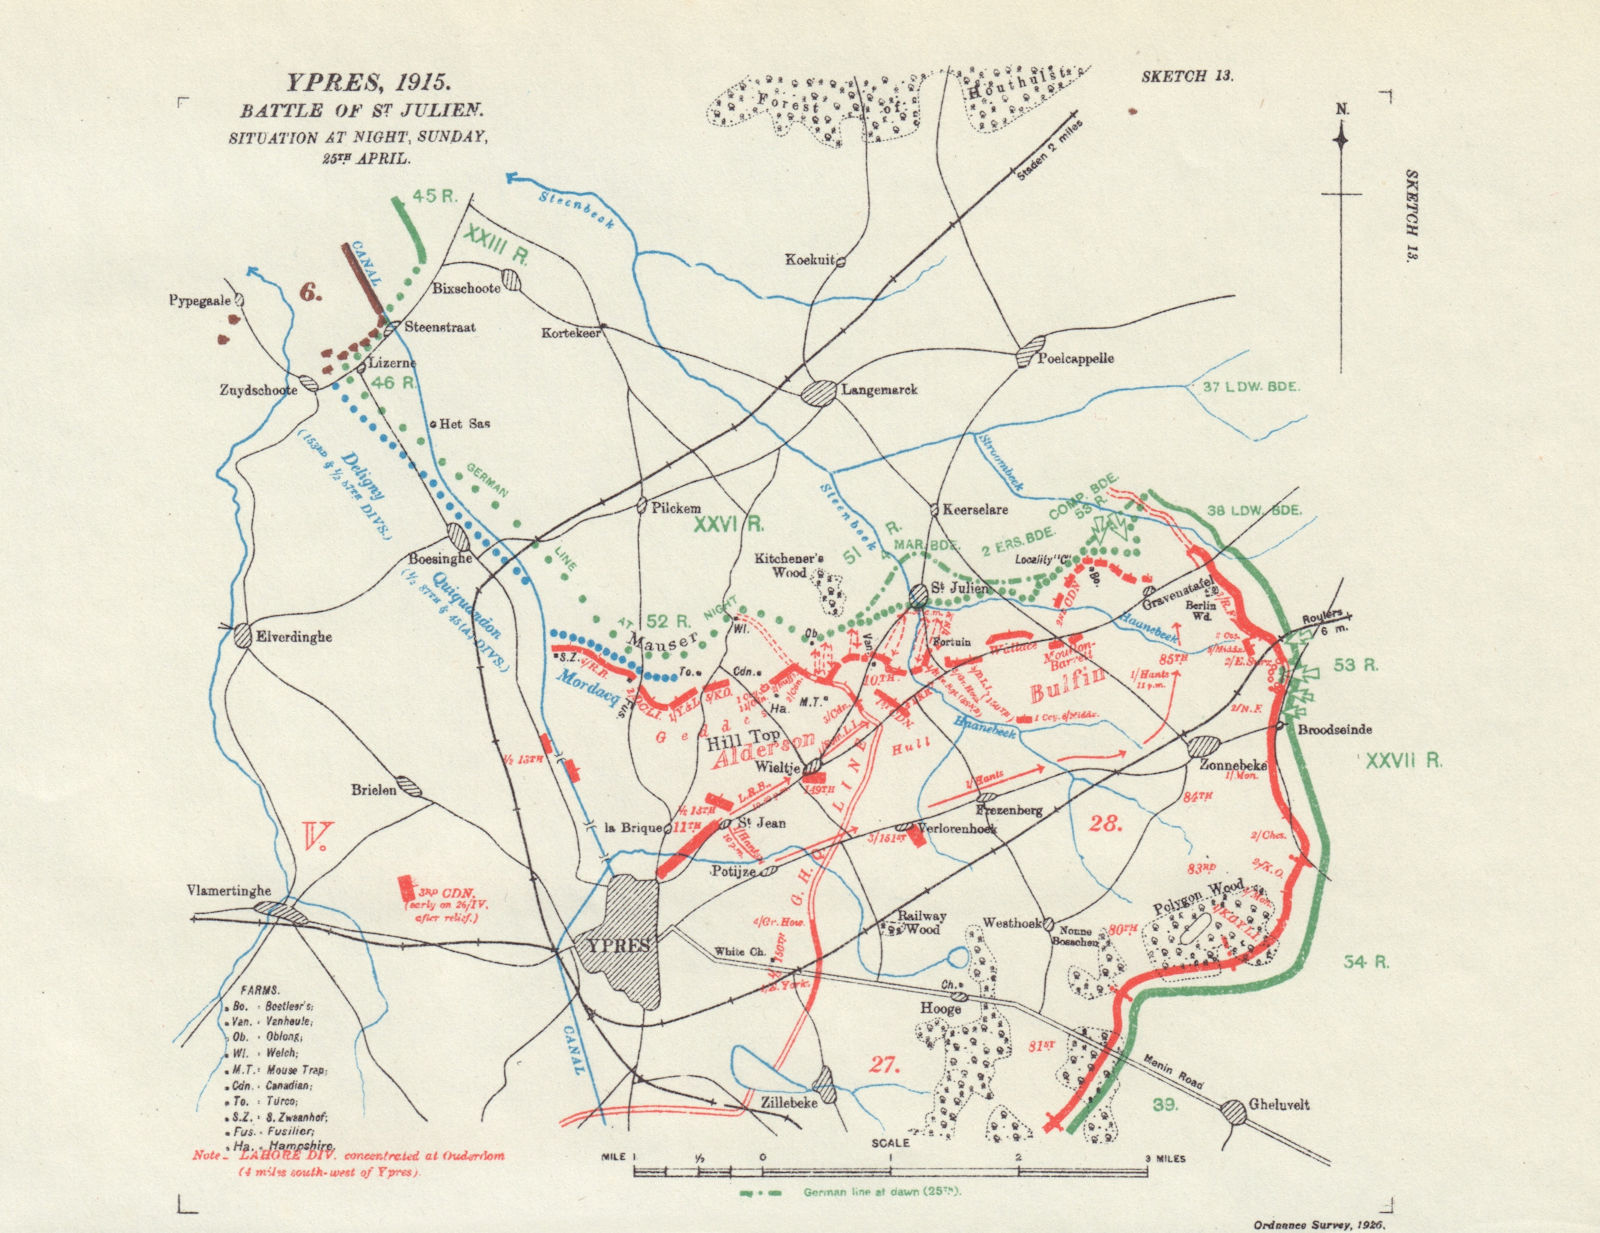 Ypres, 1915. Battle of St Julien. Situation at Night, 25th April. WW1. 1927 map